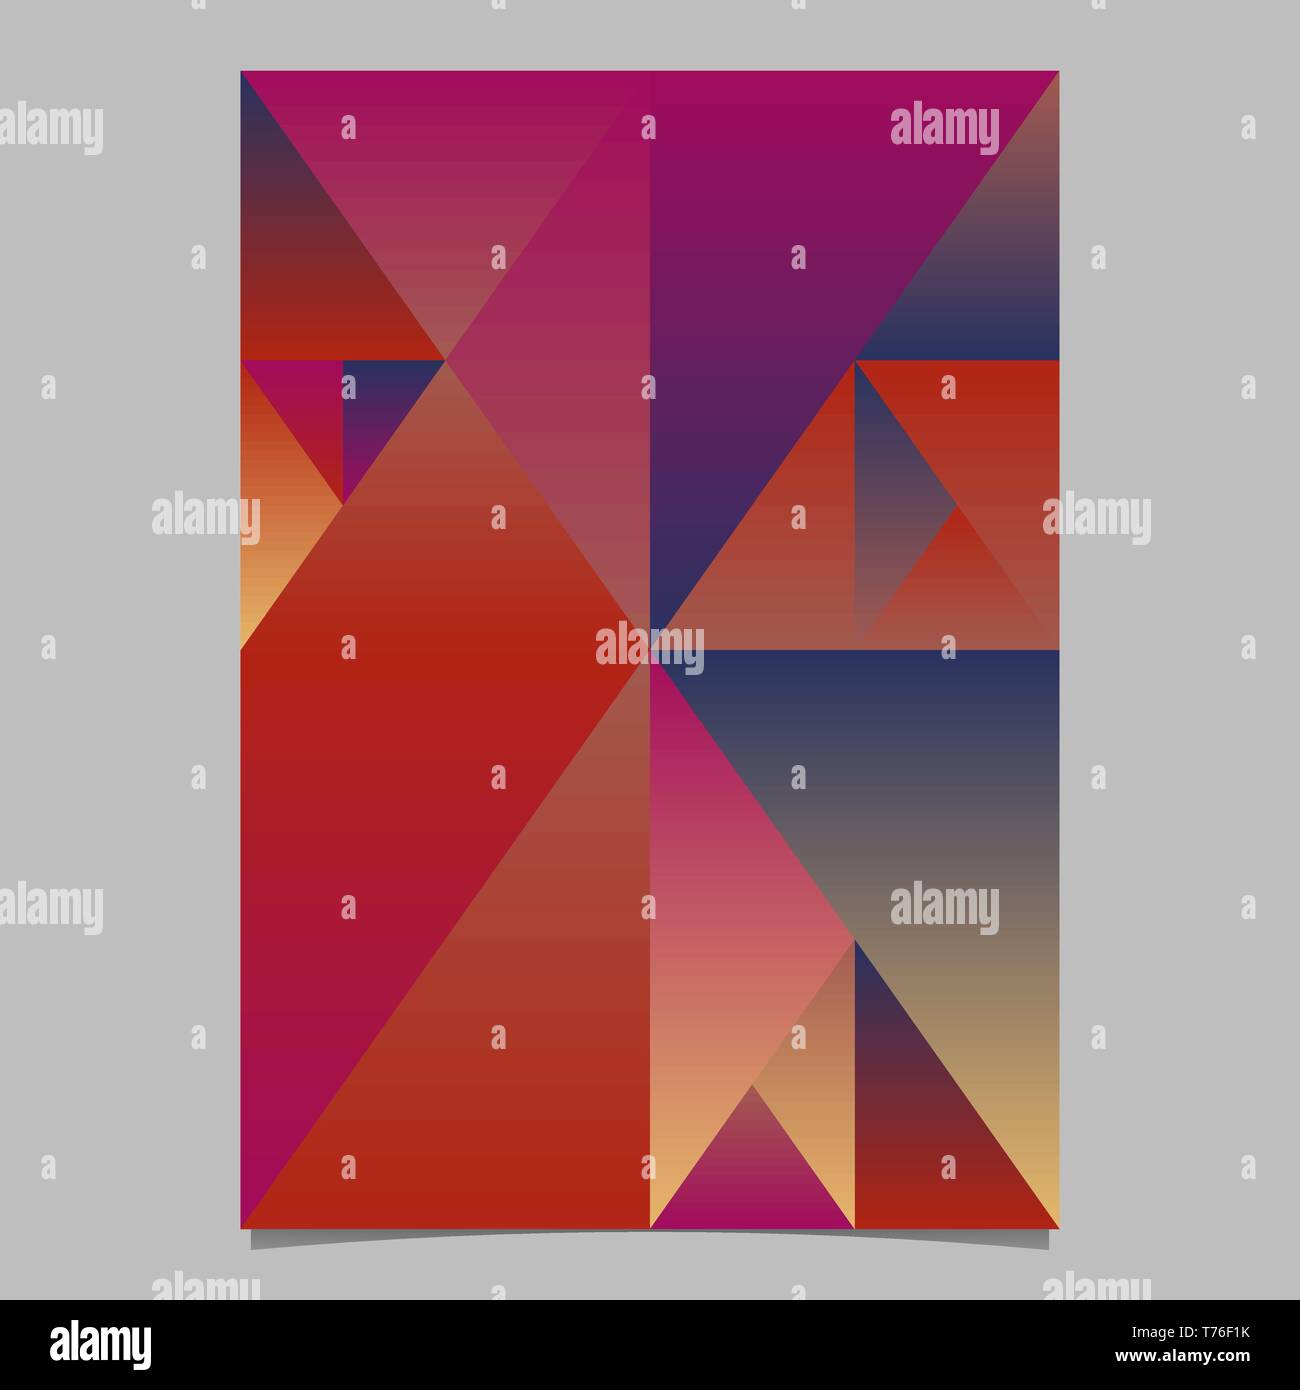 Polygonal gradient triangle mosaic poster template background Stock Vector